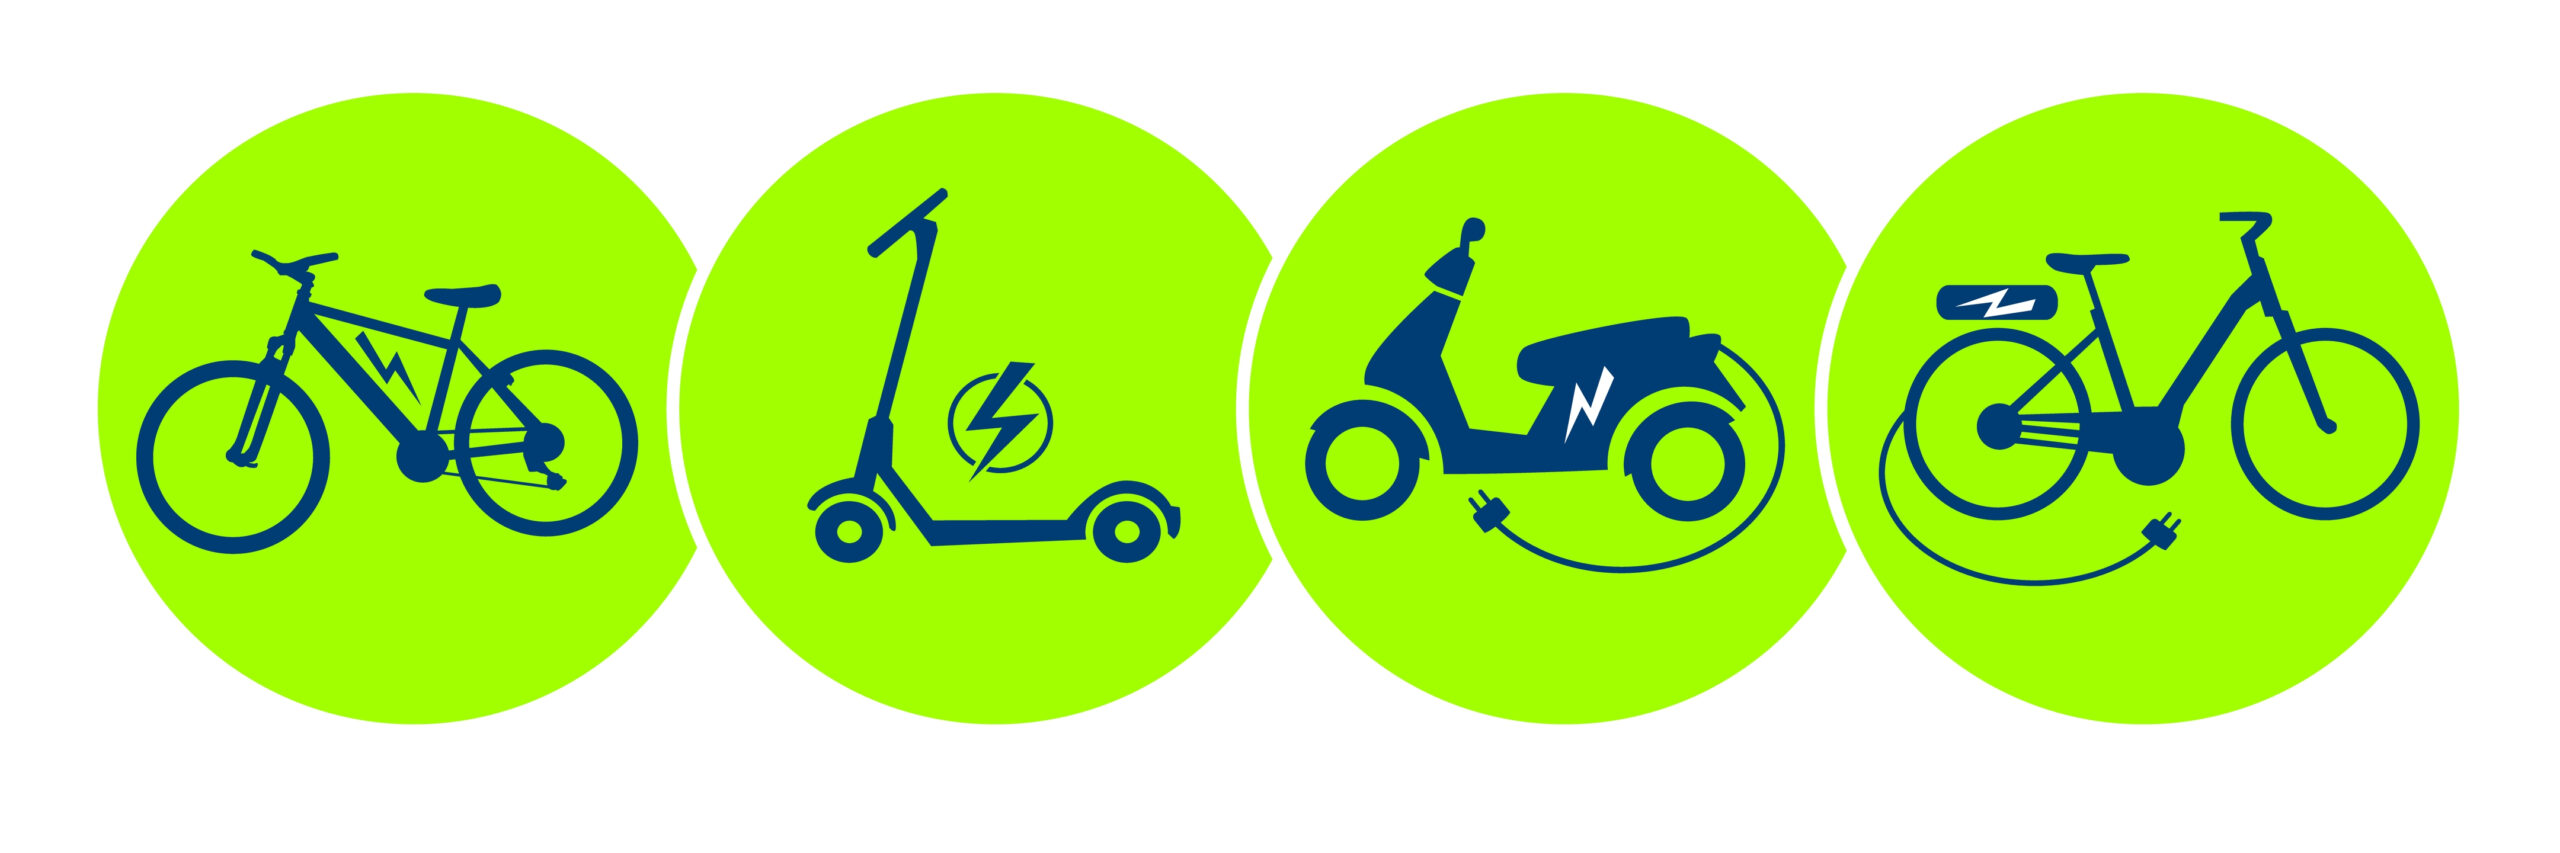 Logos for e-bikes and e-scooters